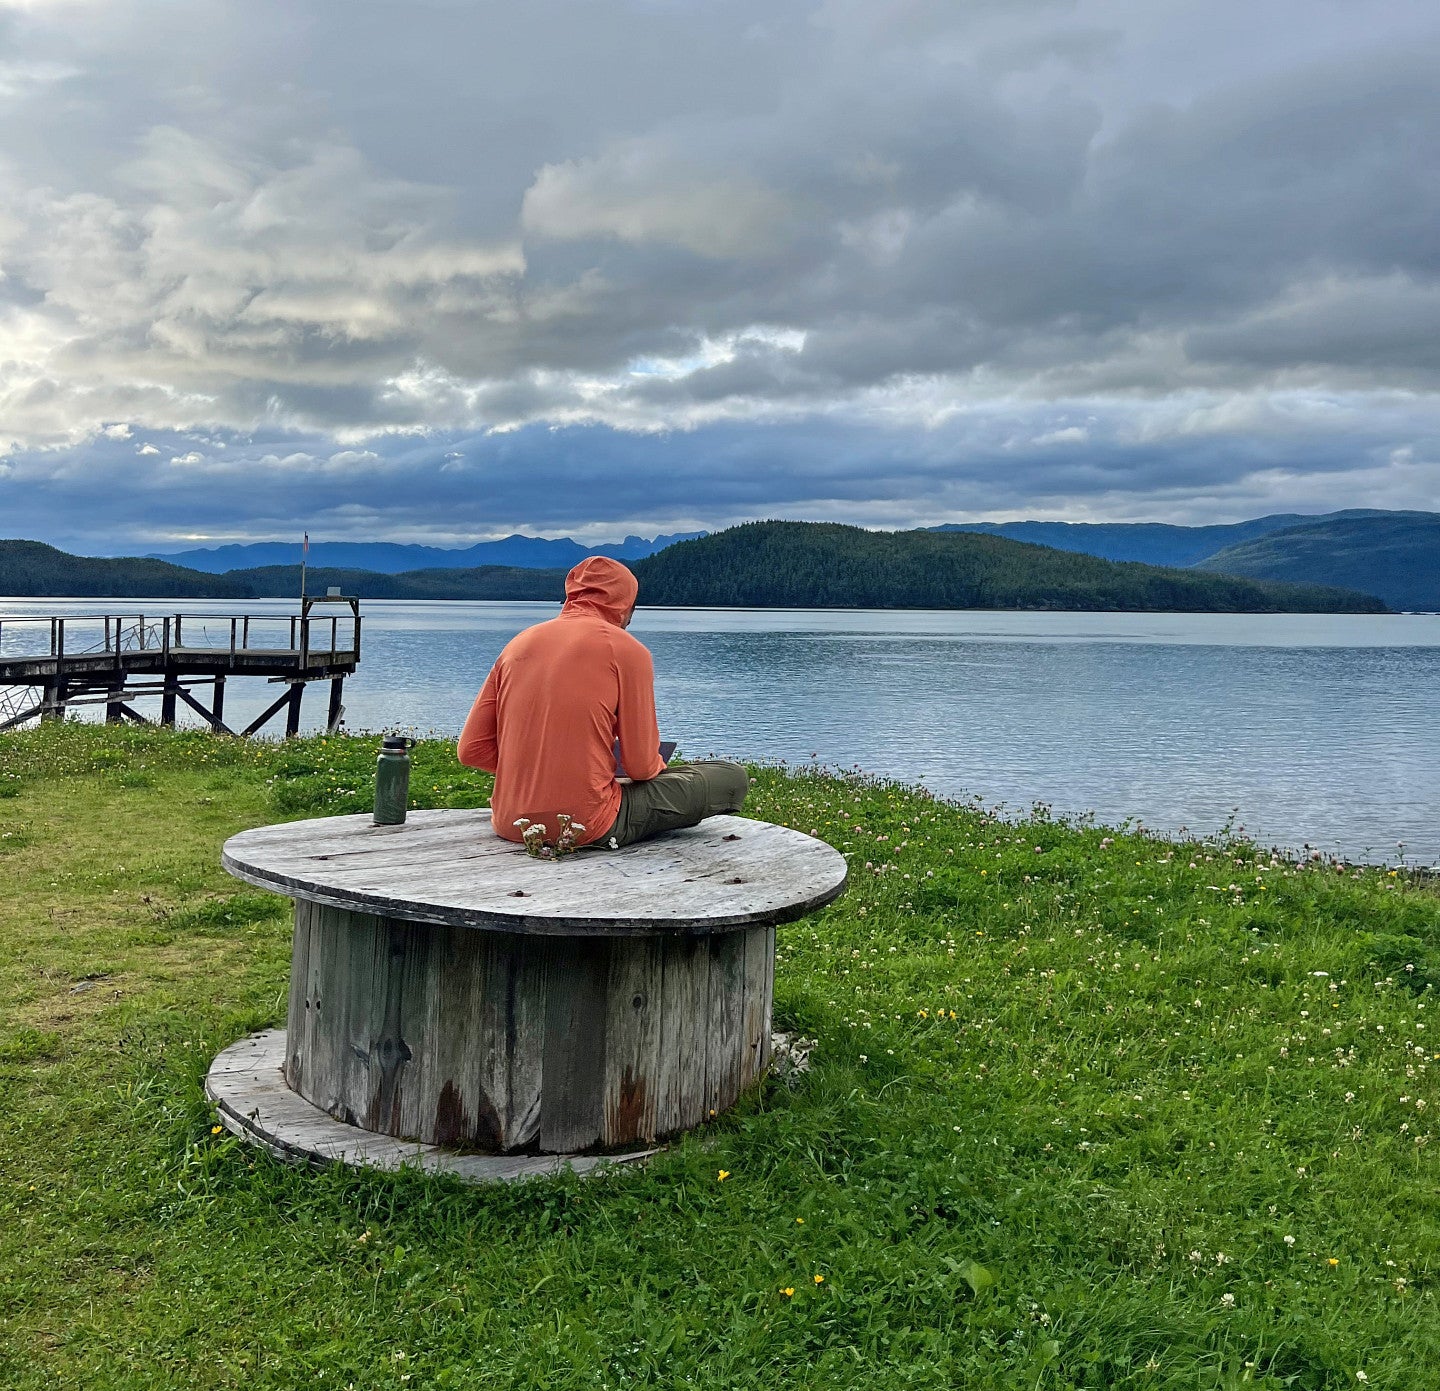 A person wearing an orange jacket sits on a wooden table outside in Cordova, Alaska